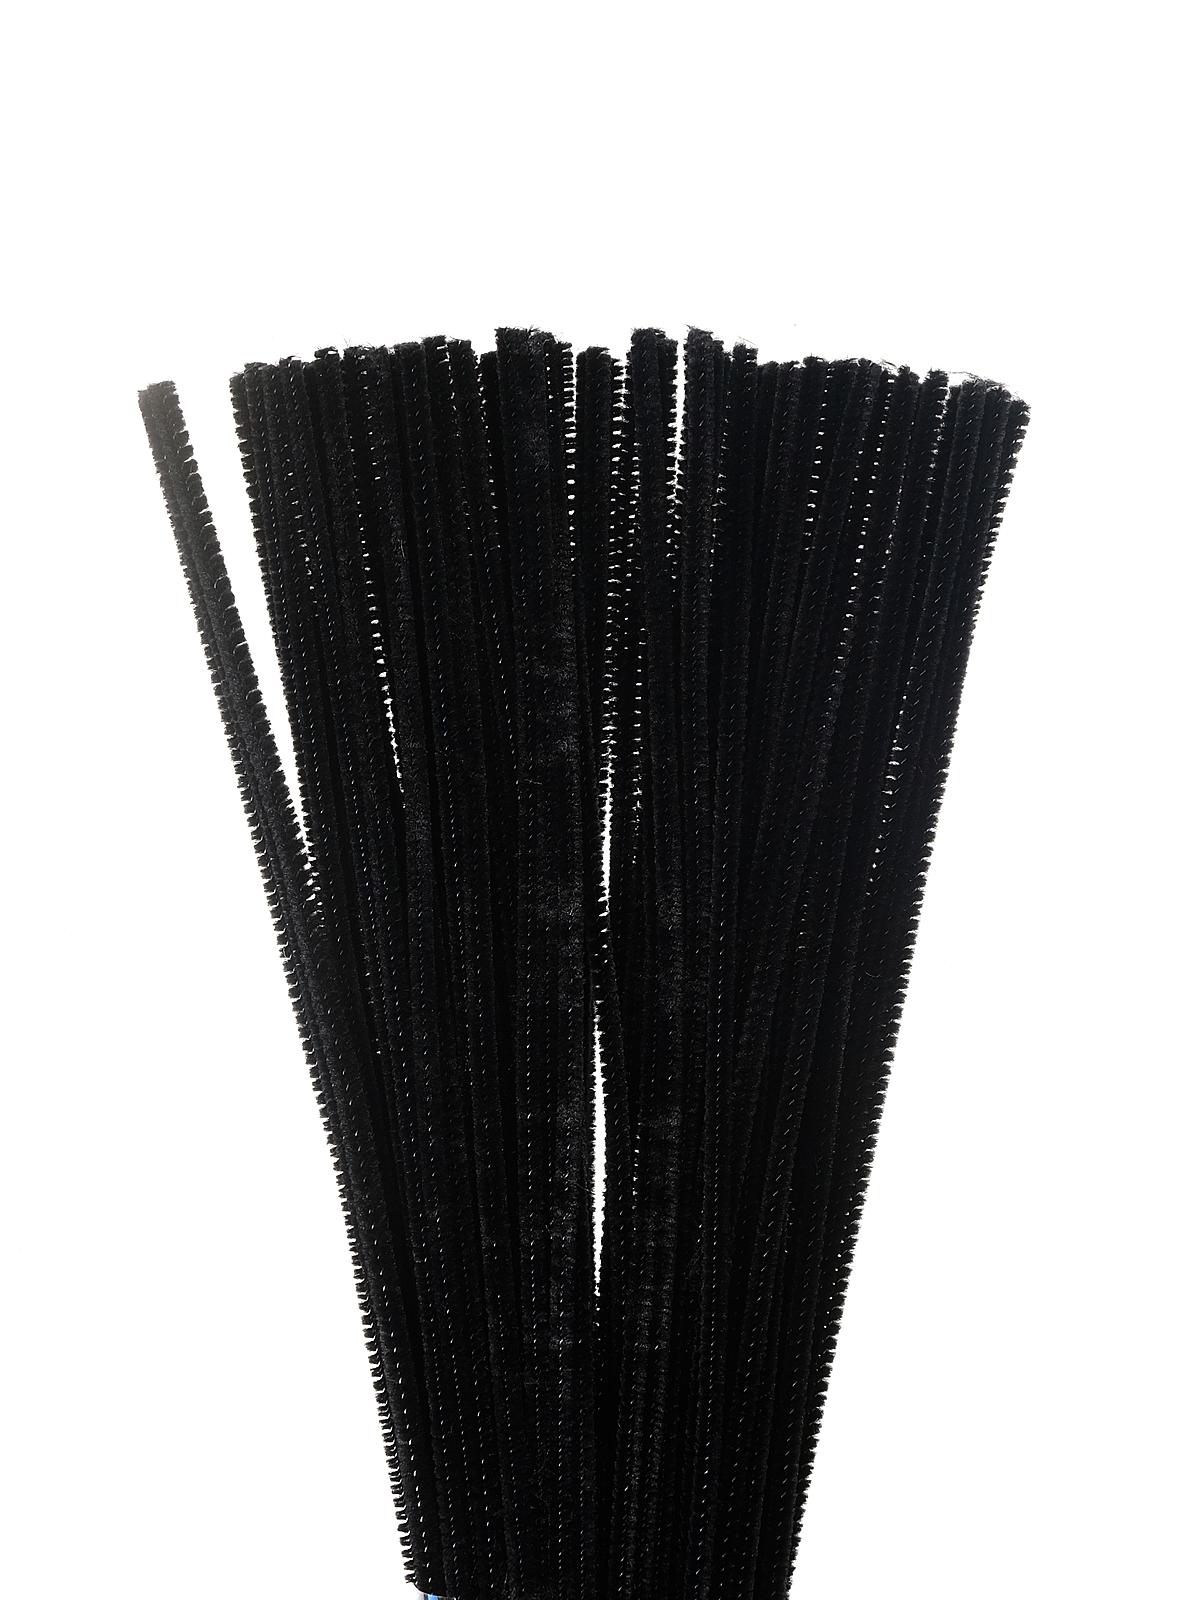 Chenille Stems 4 Mm X 12 In. 100 Pieces Black